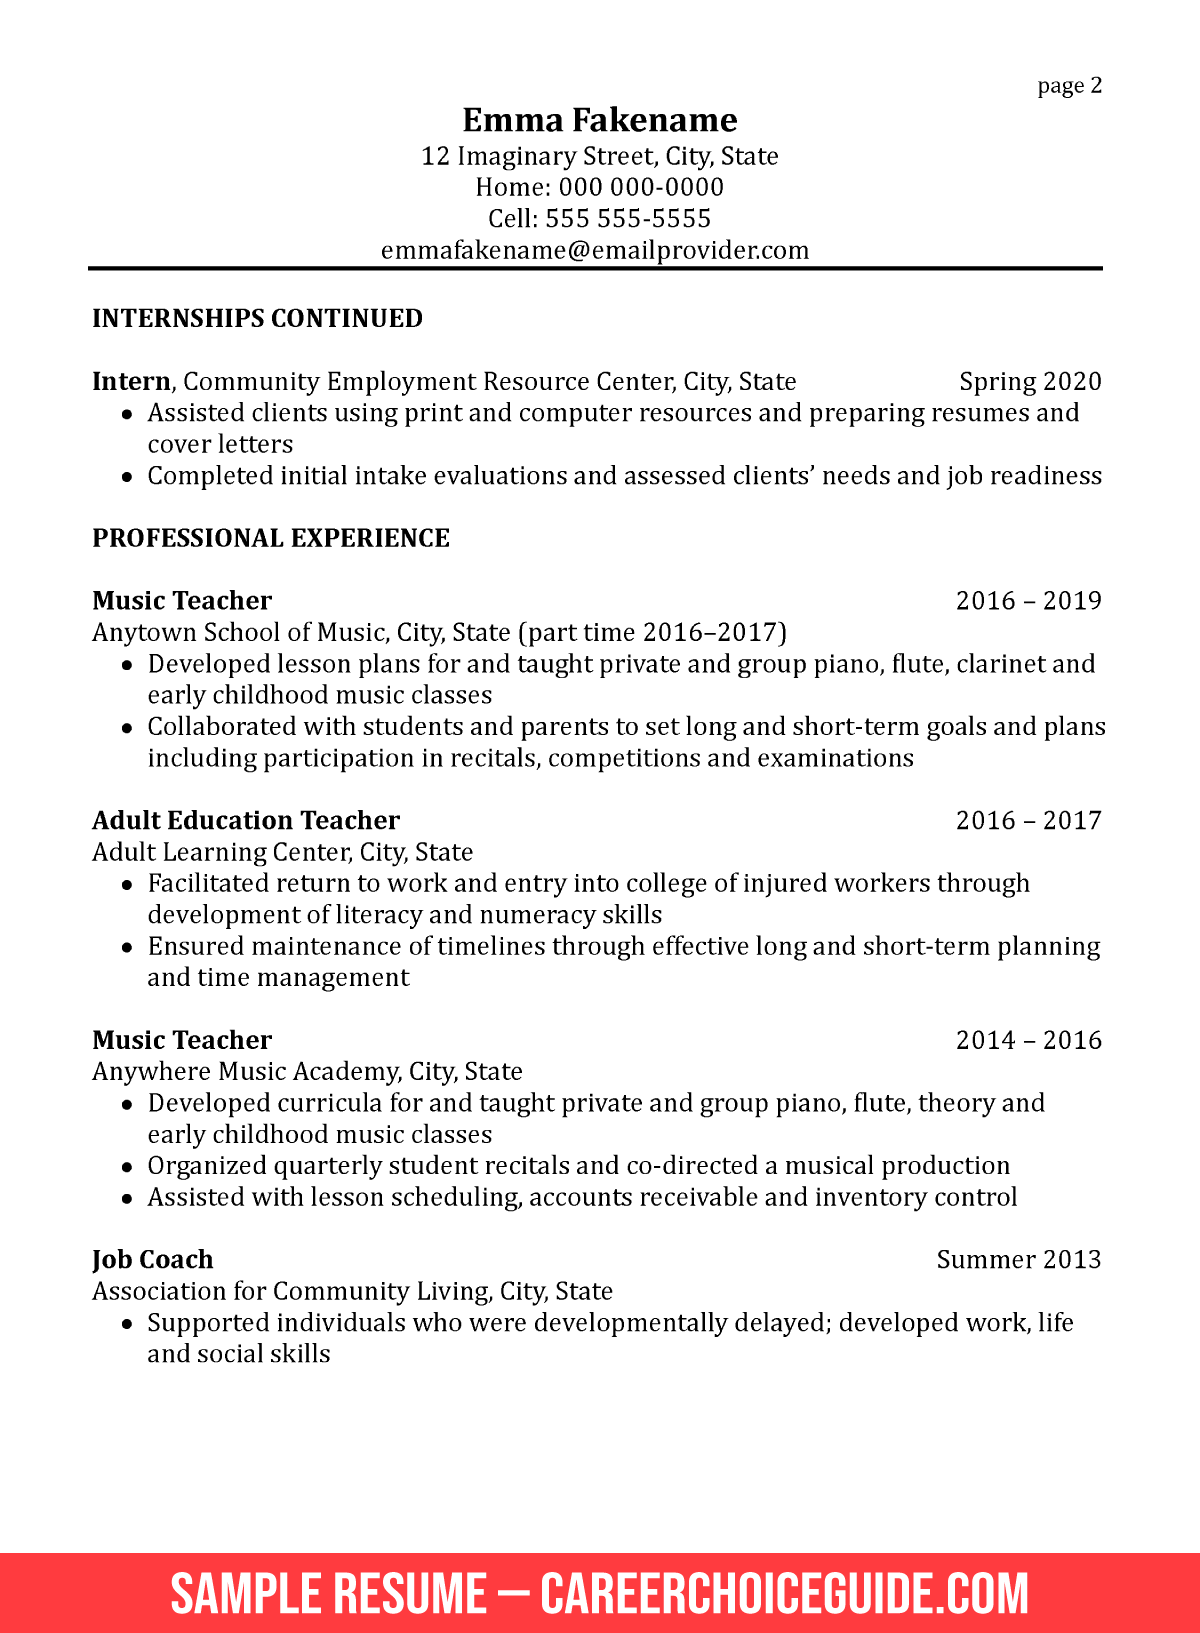 Career Change Resume Sample and Tips